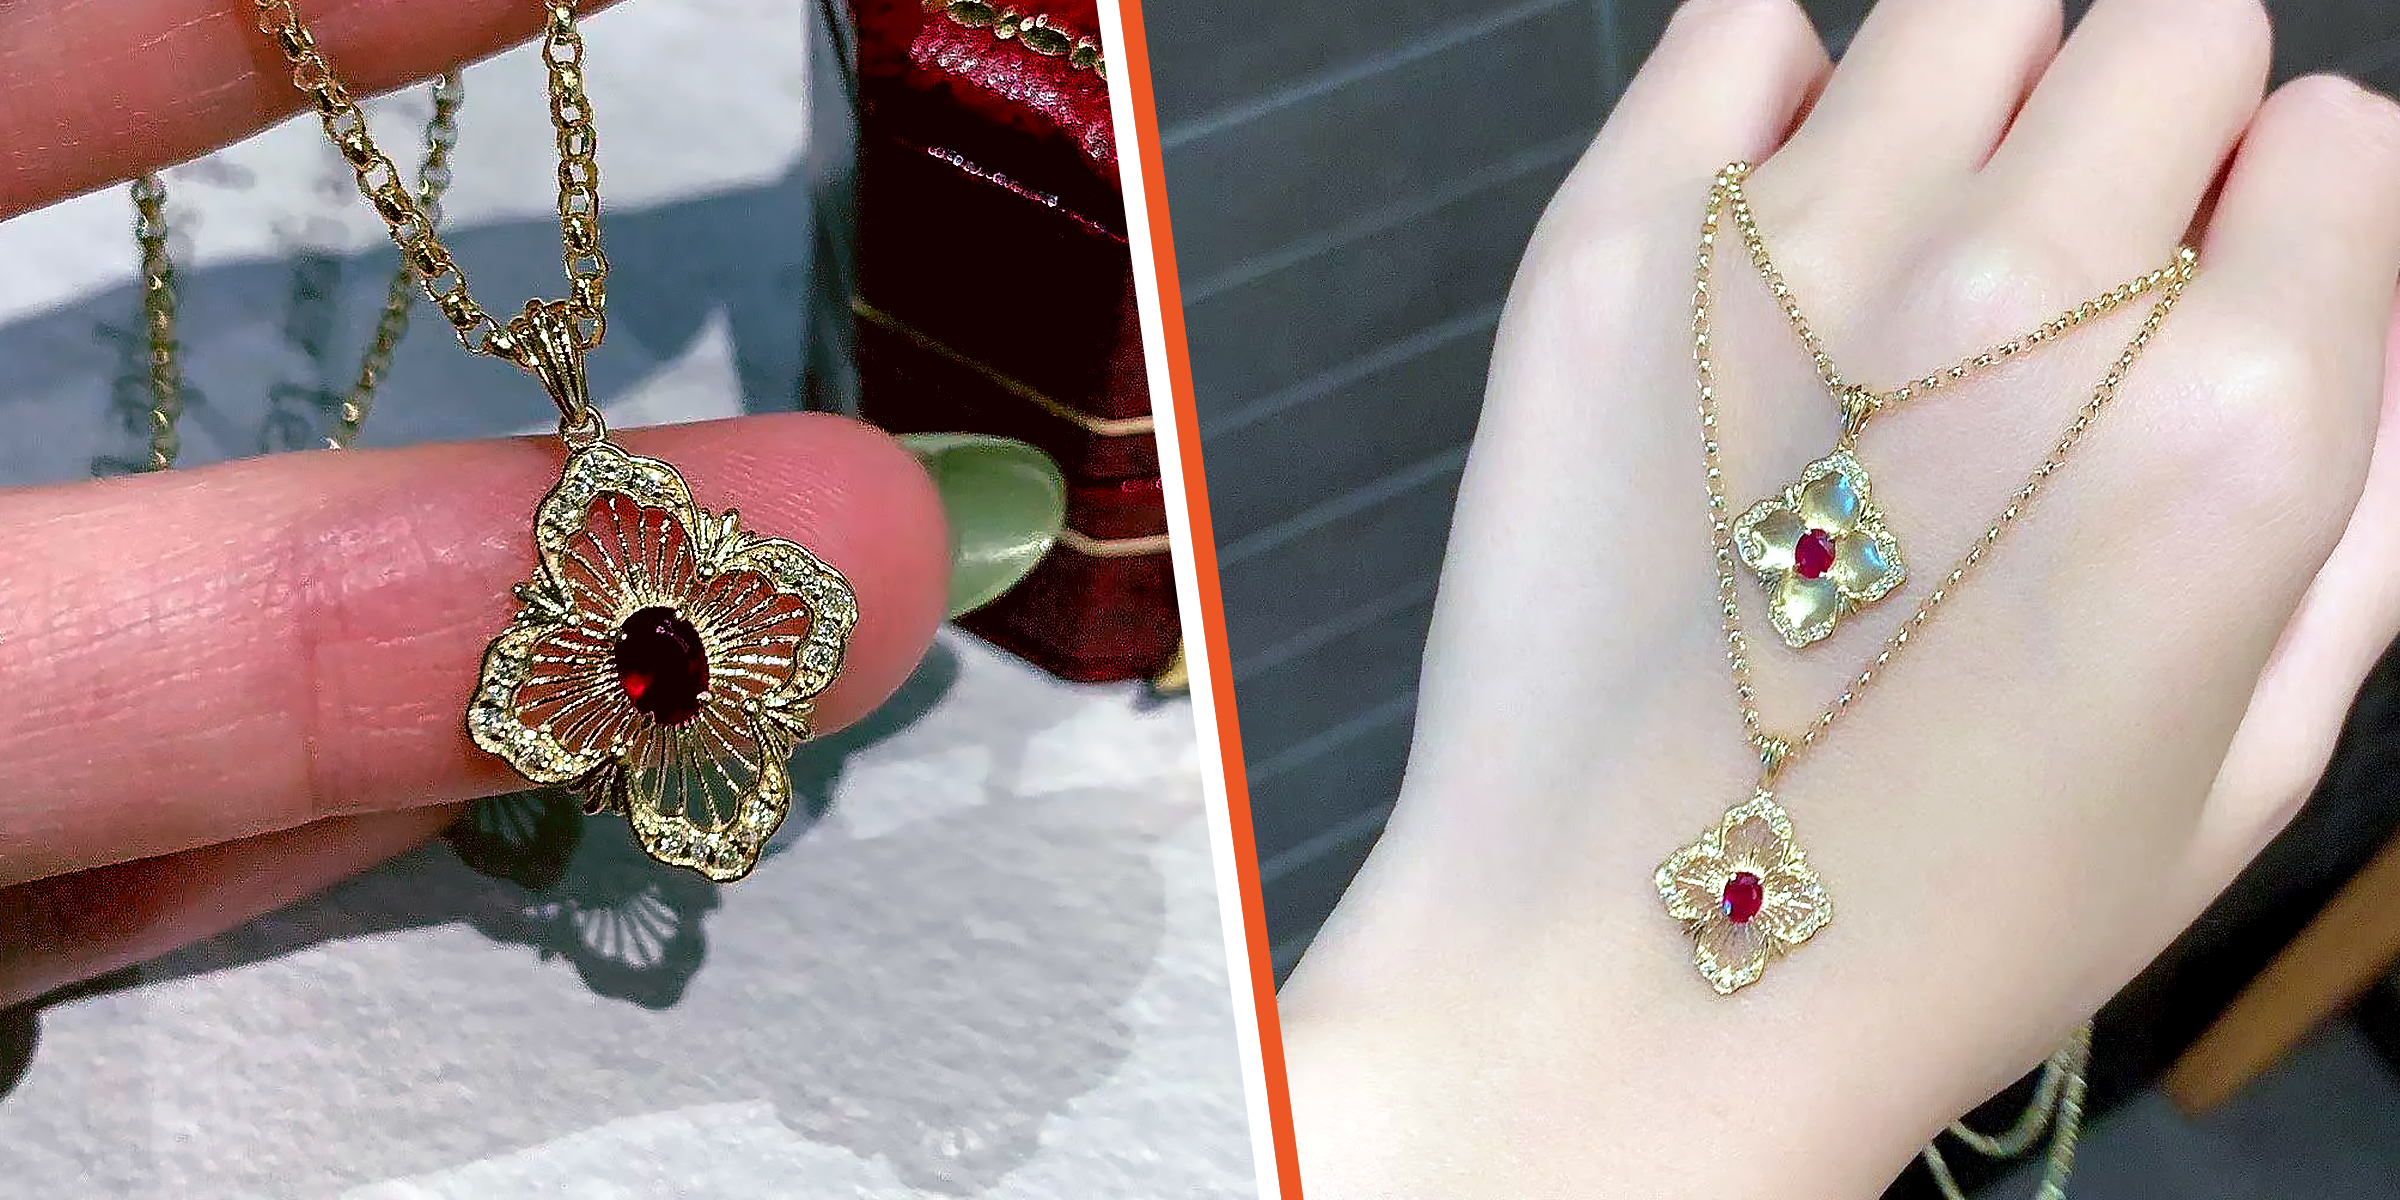 Ruby pendant necklace | Source: Reddit/waifung18